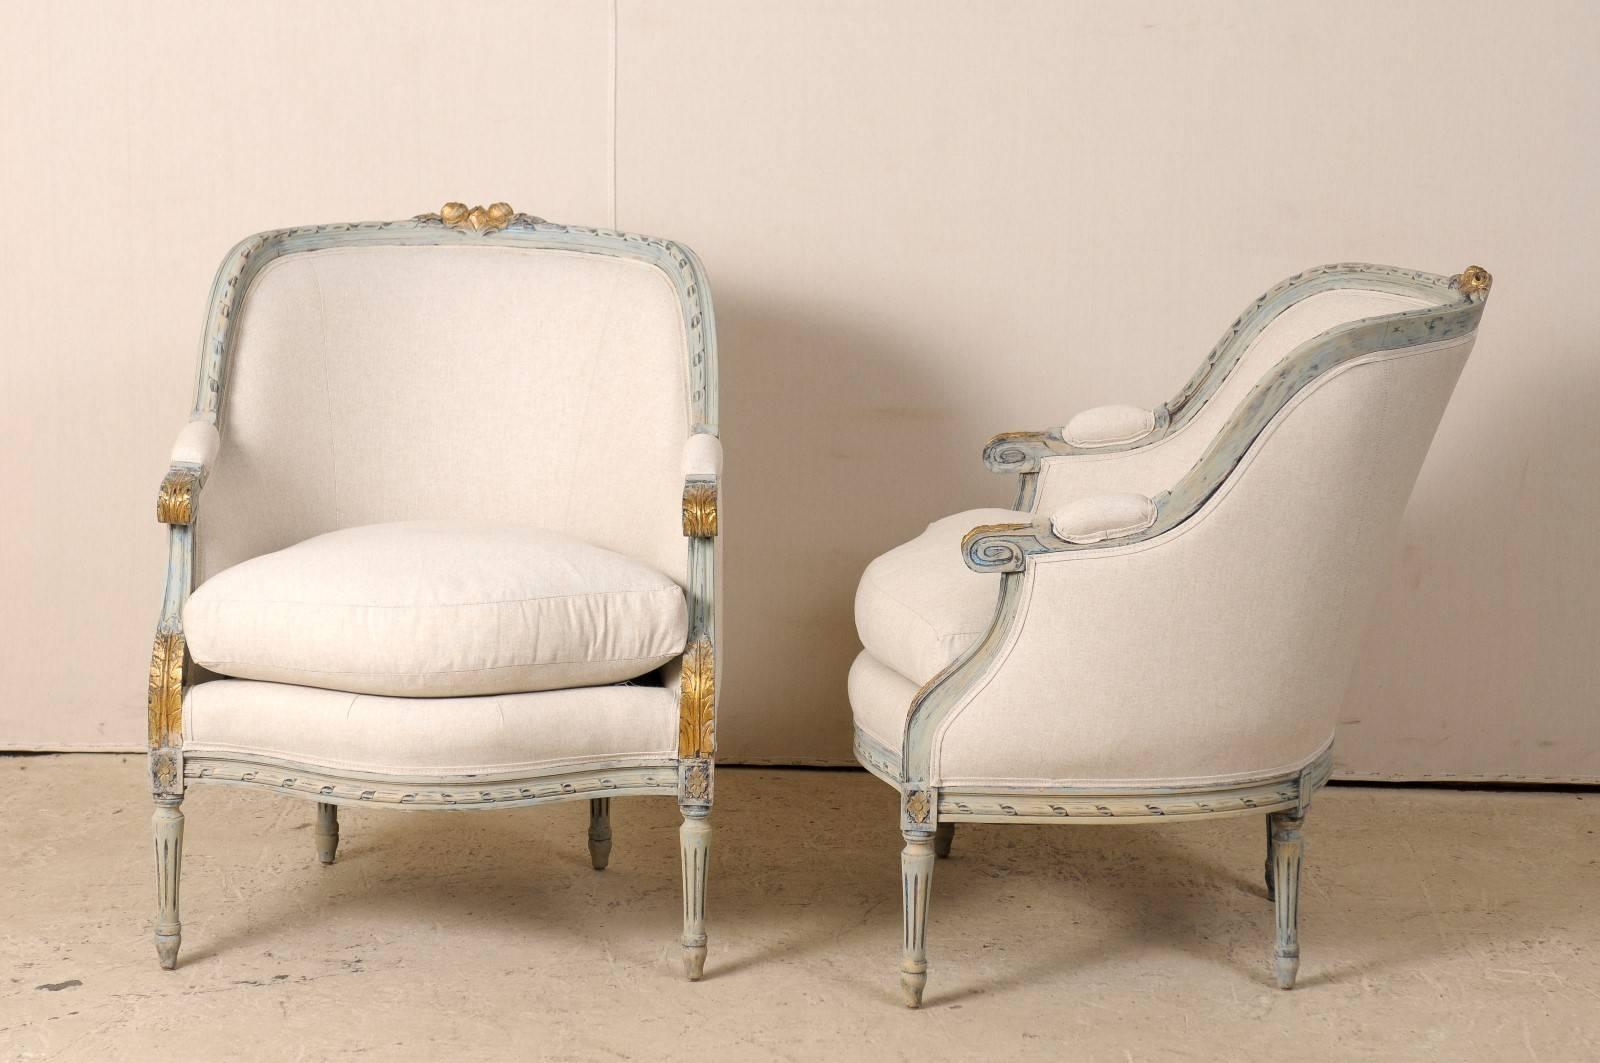 A pair of French Louis XVI style occasional barrelback bergères chairs, circa 1920. This pair of French painted wood chairs features scrolled and upholstered arms, fluted legs with rosettes on the knees, acanthus leaves and rose carvings on the top